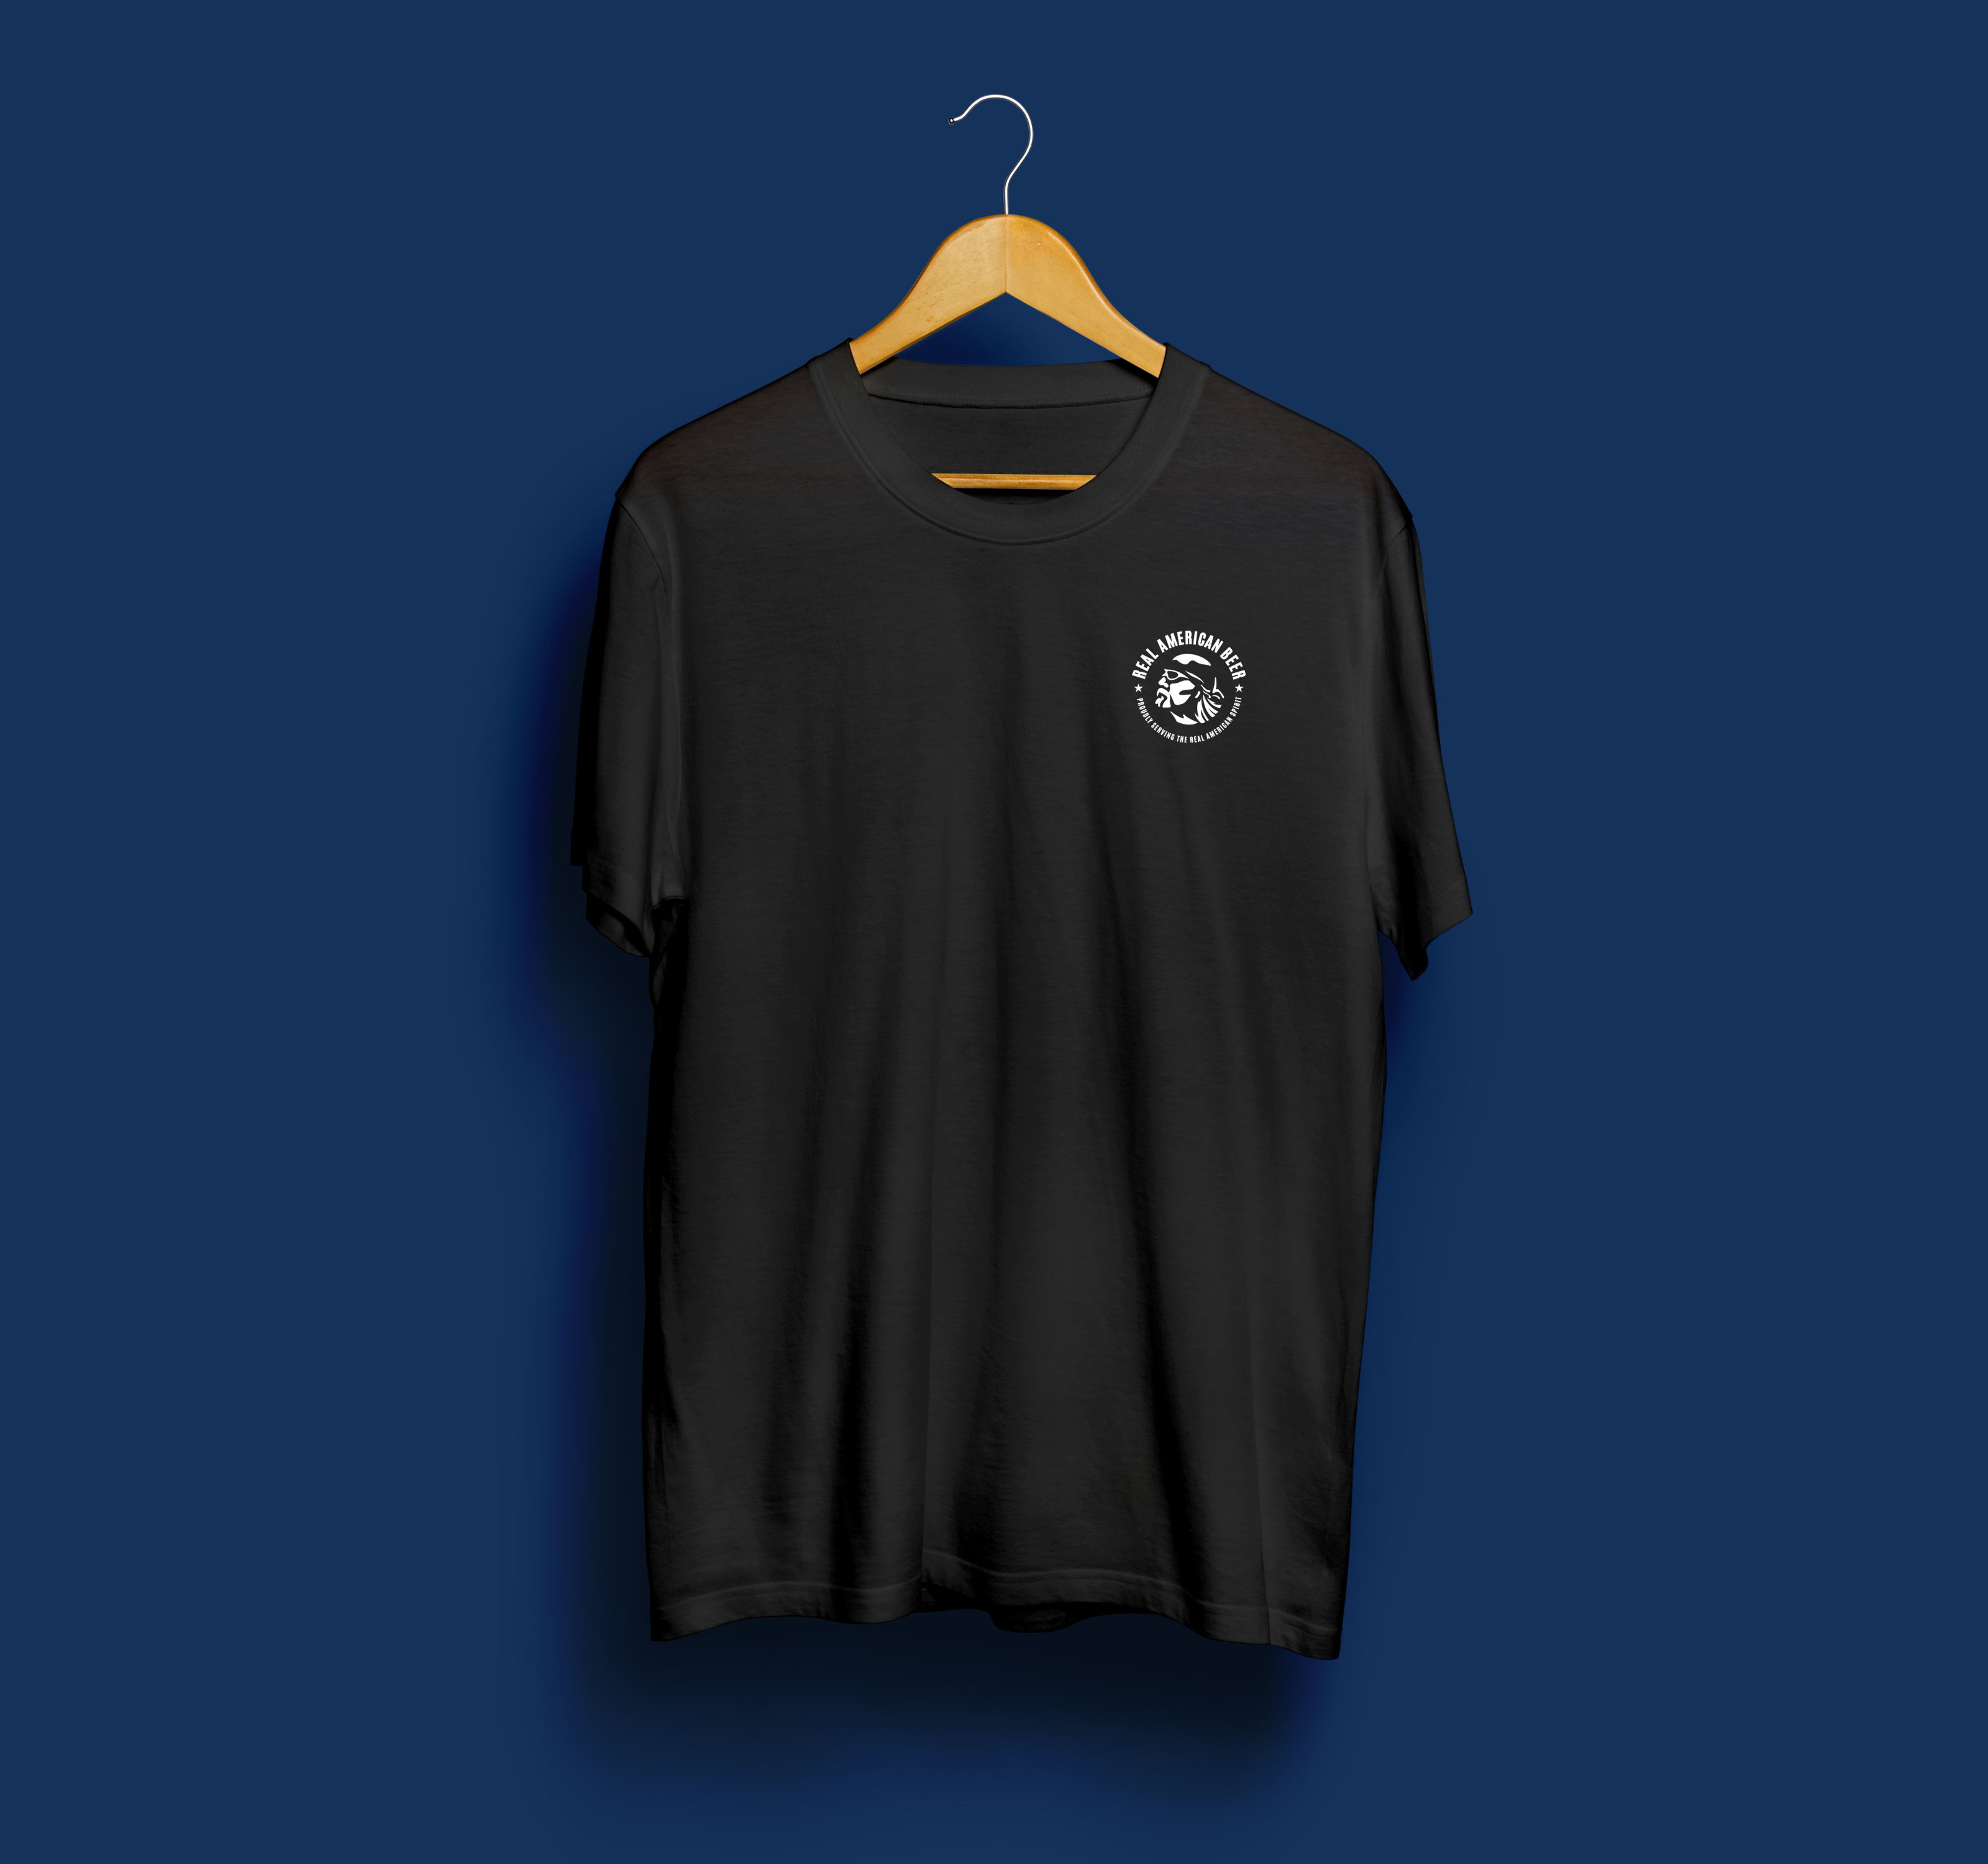 Front – Small Hulk badge on a black tee